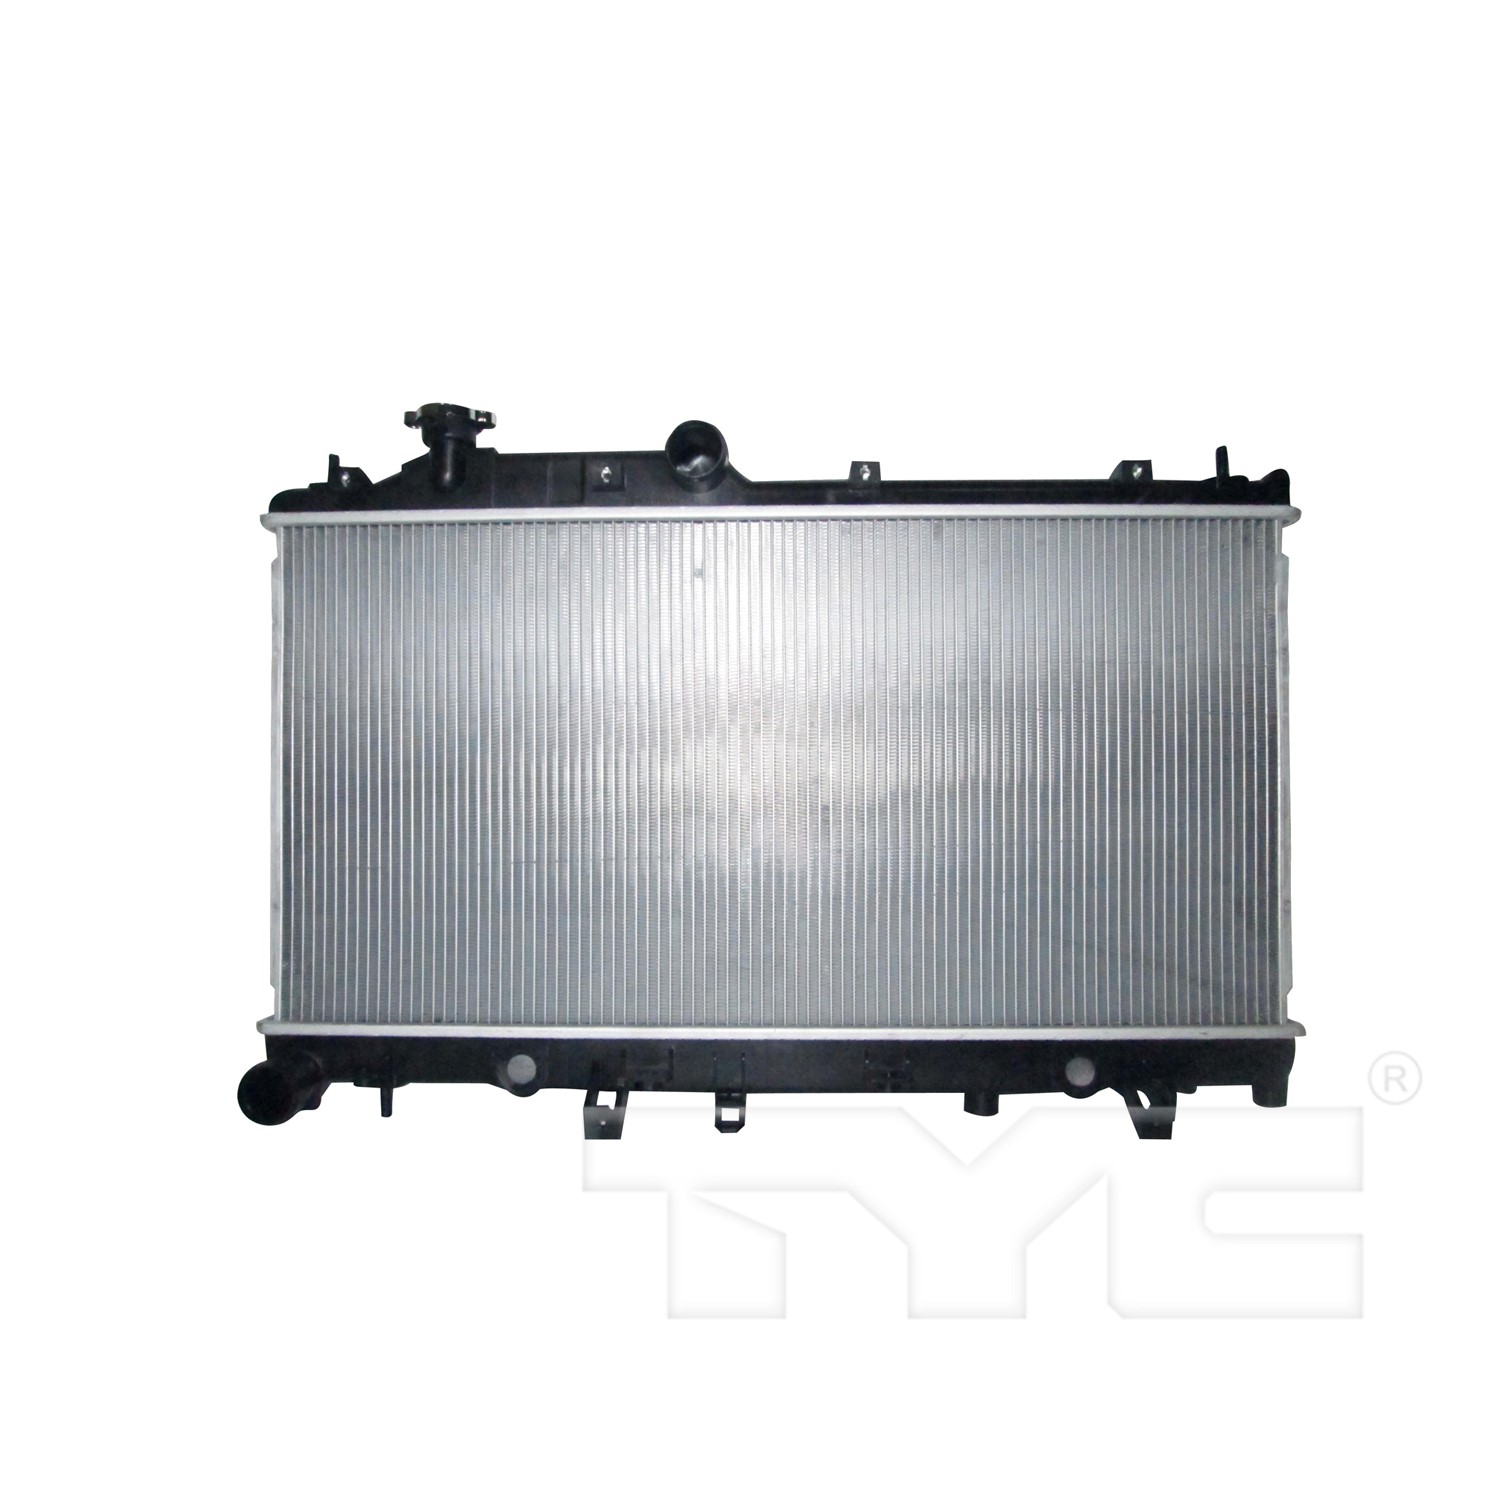 Aftermarket RADIATORS for SUBARU - OUTBACK, OUTBACK,10-14,Radiator assembly